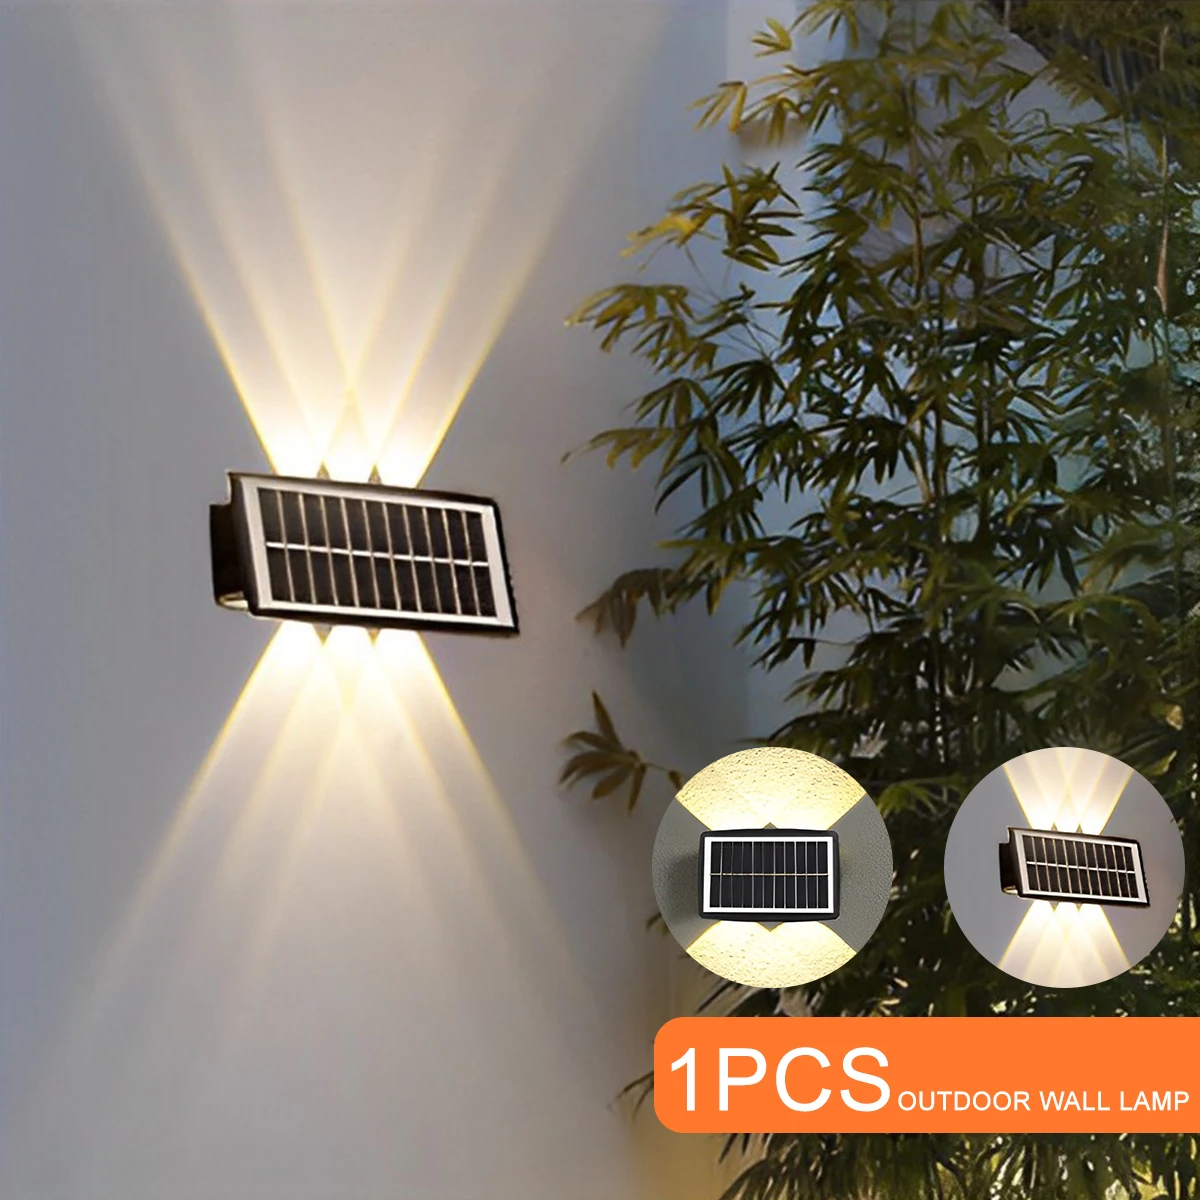 

6 LED/ 4 LED Solar Wall Light Solar Garden Lights Glow Up and Down Solar Fence Lights IP65 Waterproof Outdoor Solar LED Lamp